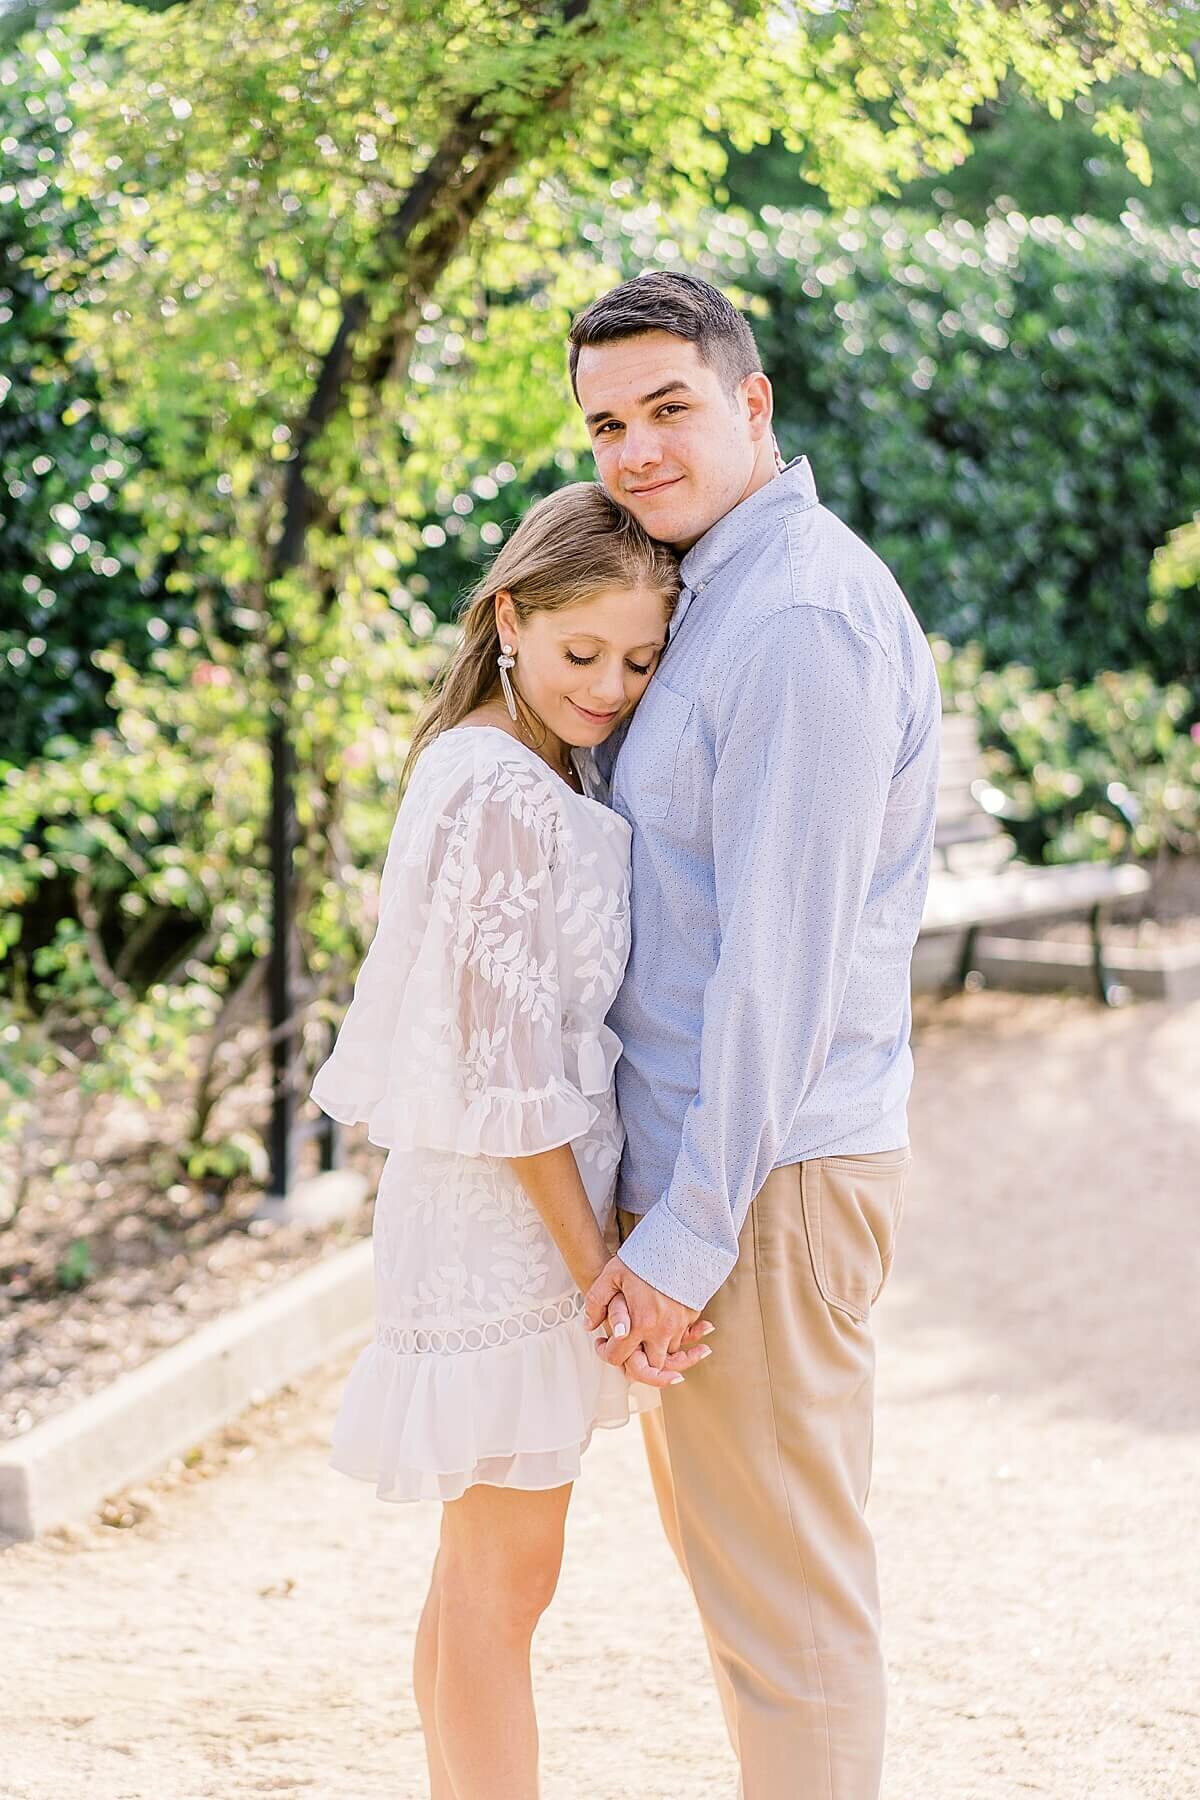 McGovern-Centennial-Gardens-Hermann-Park-Engagement-Session-Alicia-Yarrish-Photography_0048